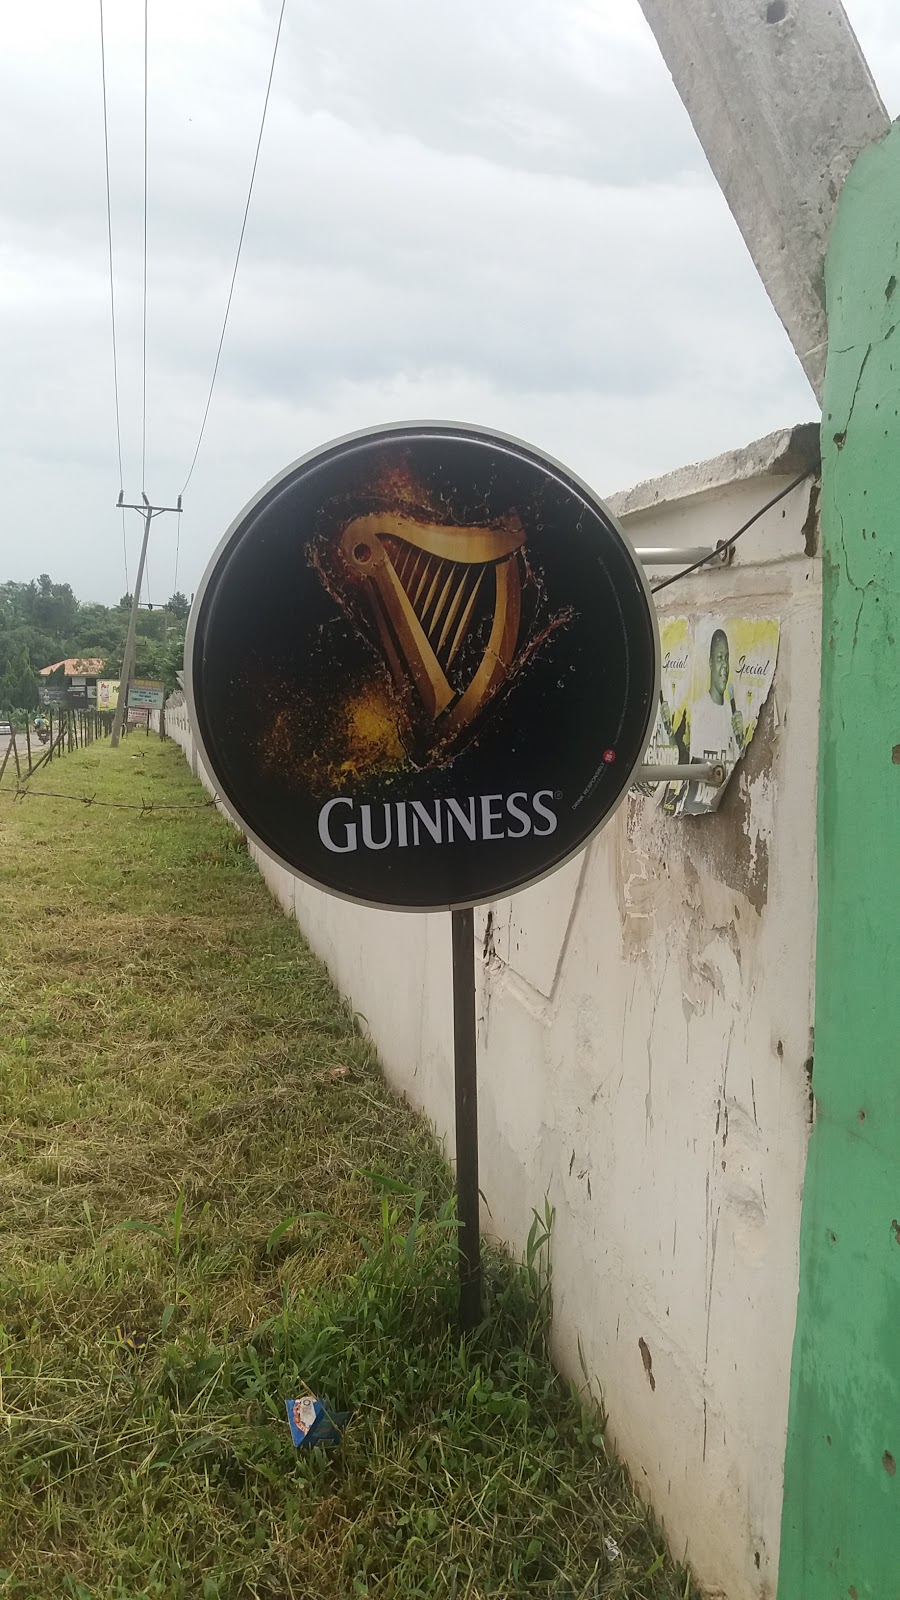 Guiness exhibition ground